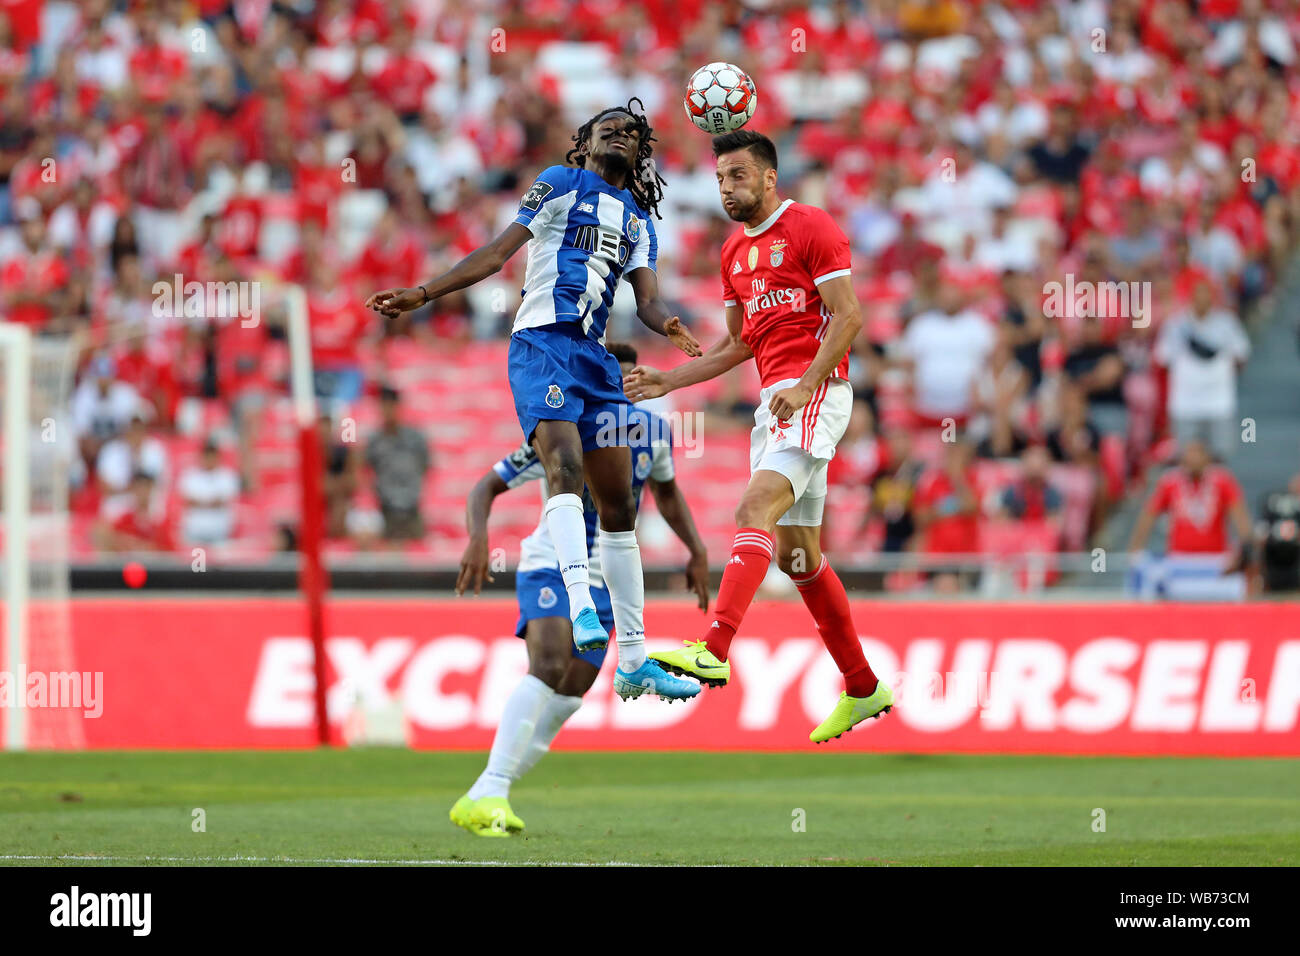 Romário Baró of FC Porto (L) and Andreas Samaris of SL Benfica (R) are seen  in action during the League NOS 2019/20 football match between SL Benfica  and FC Porto in Lisbon.(Final